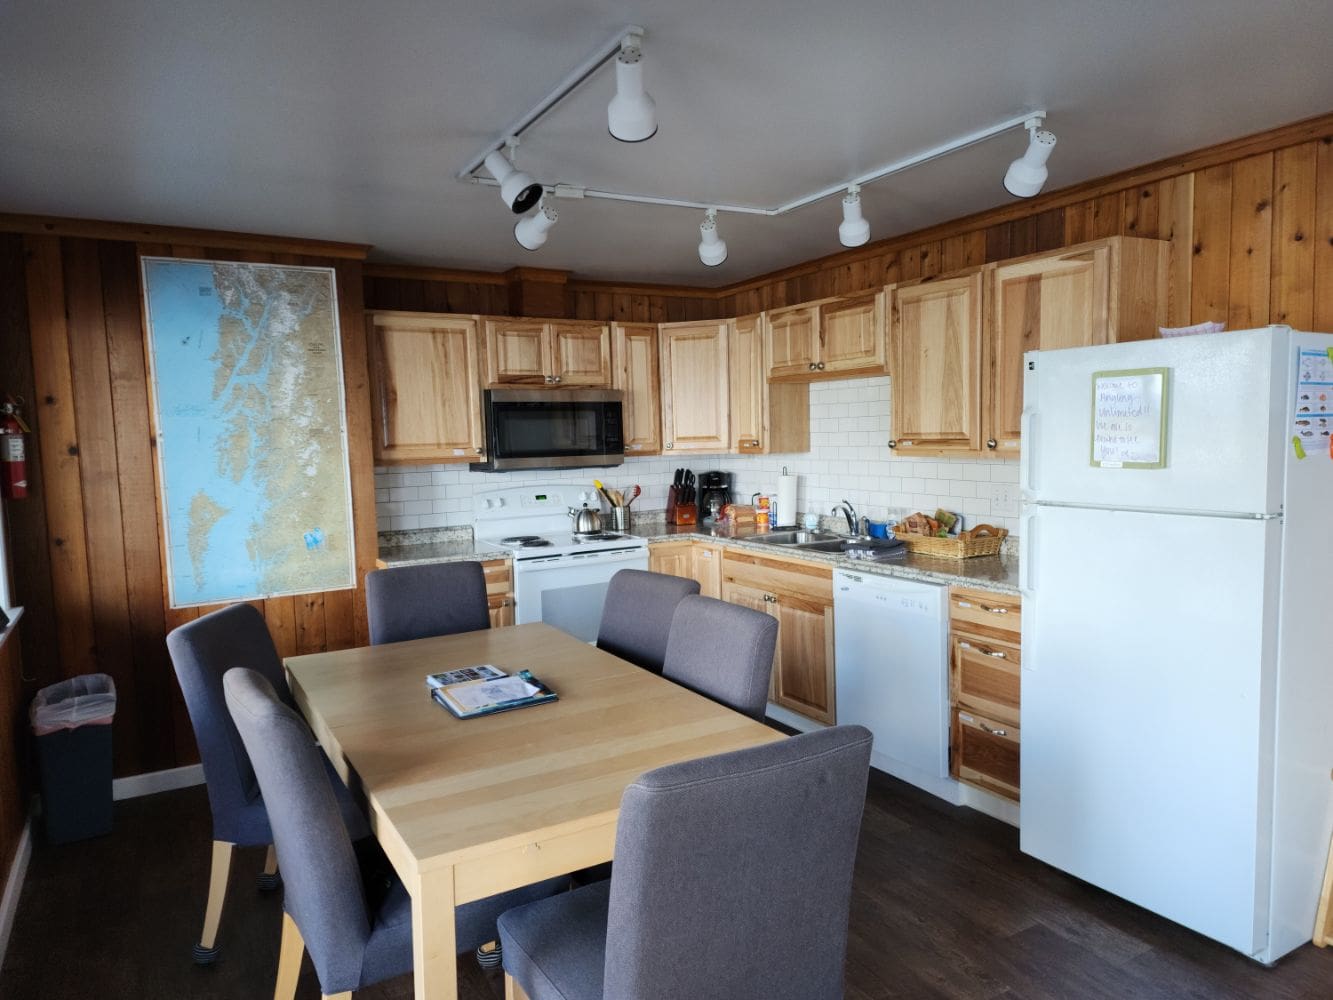 Kitchen area of a waterfront suite in Sitka, Alaska